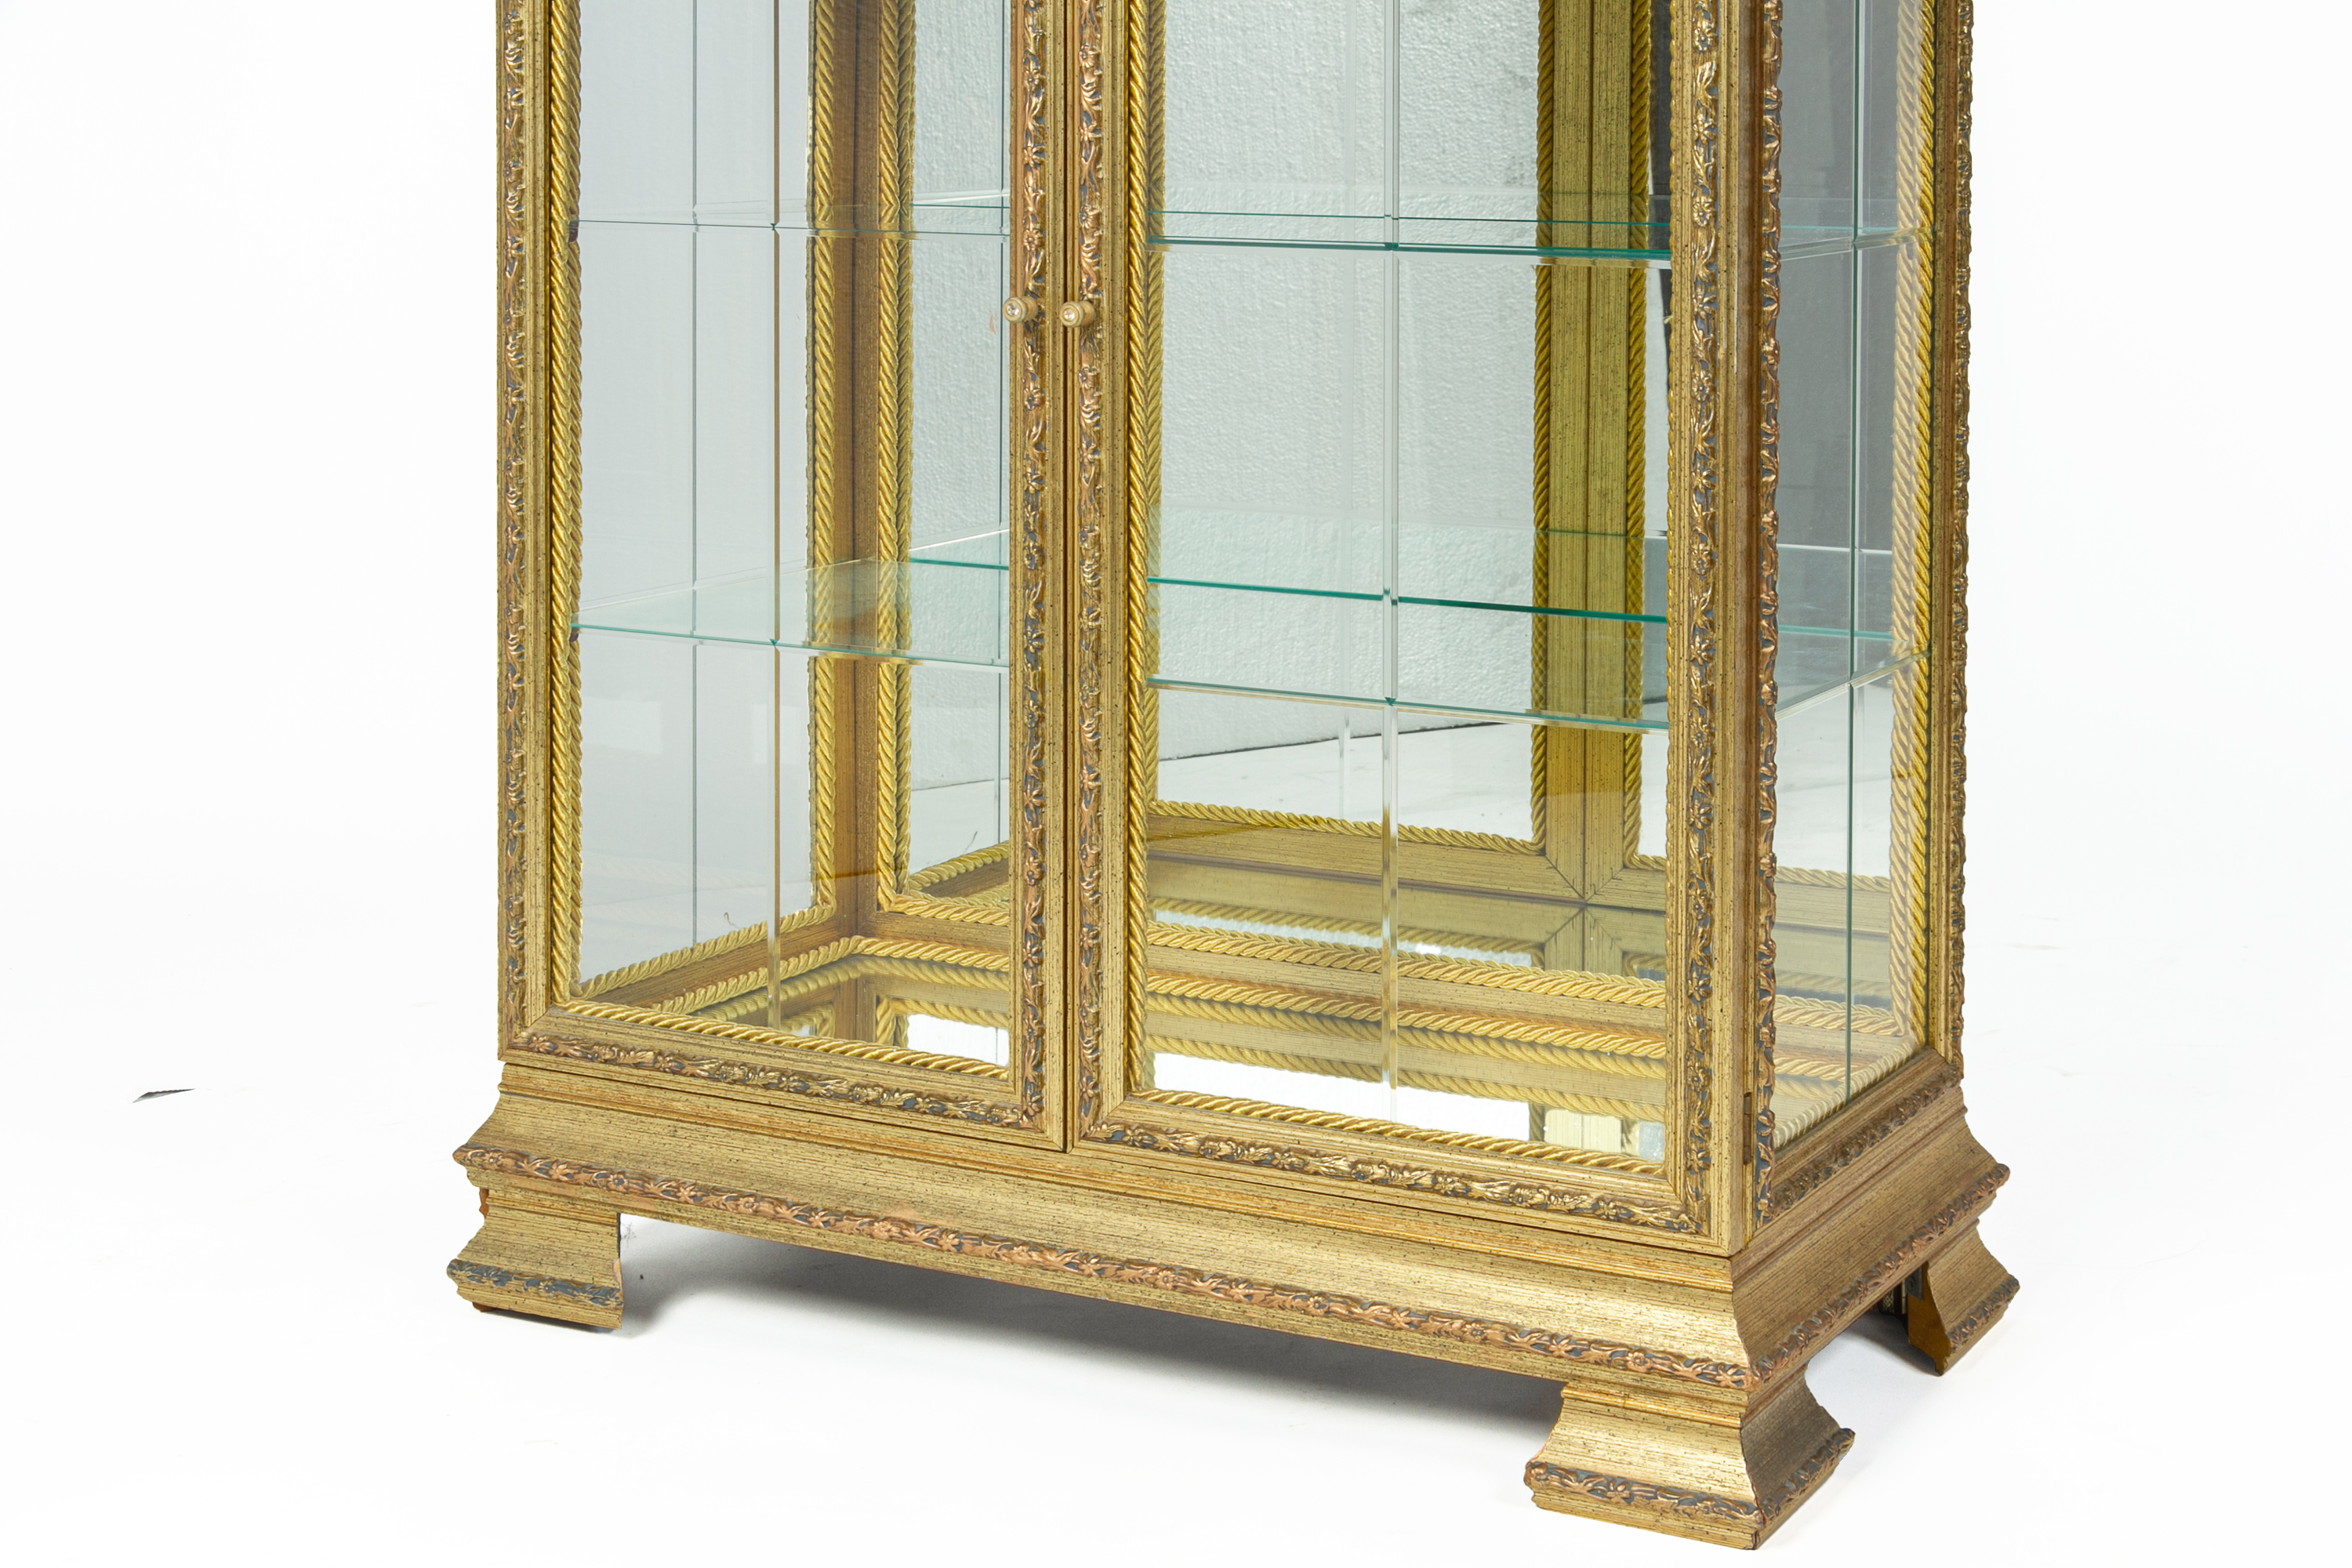 A PAIR OF ITALIAN GLAZED DISPLAY CABINETS BY DA VINCI - Image 4 of 4